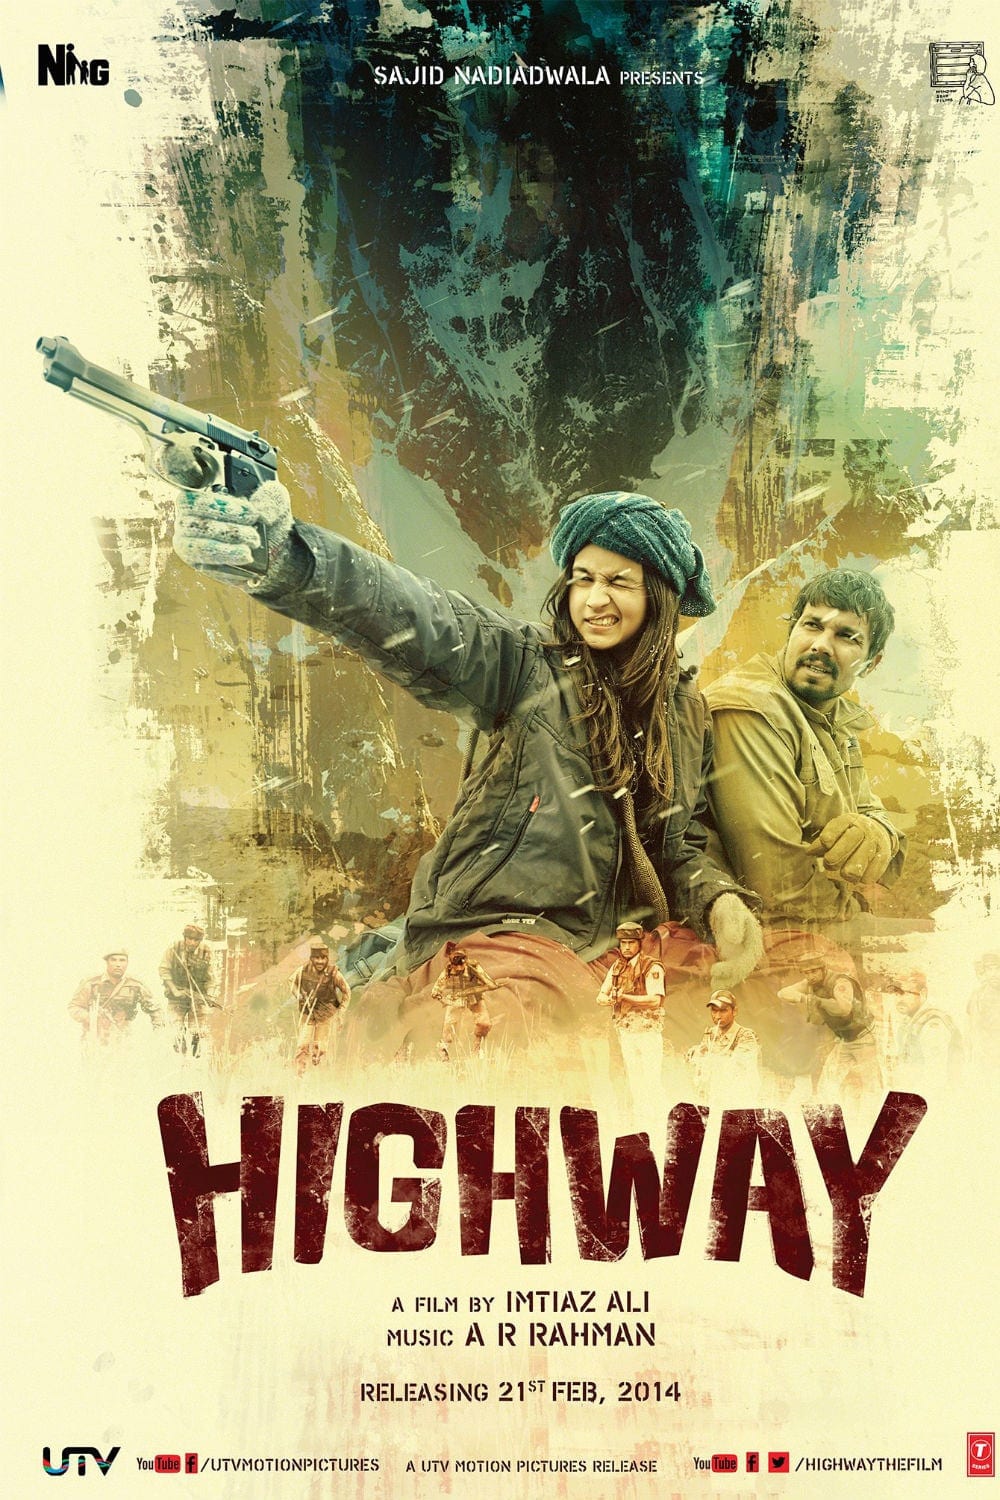 Poster for the movie "Highway"